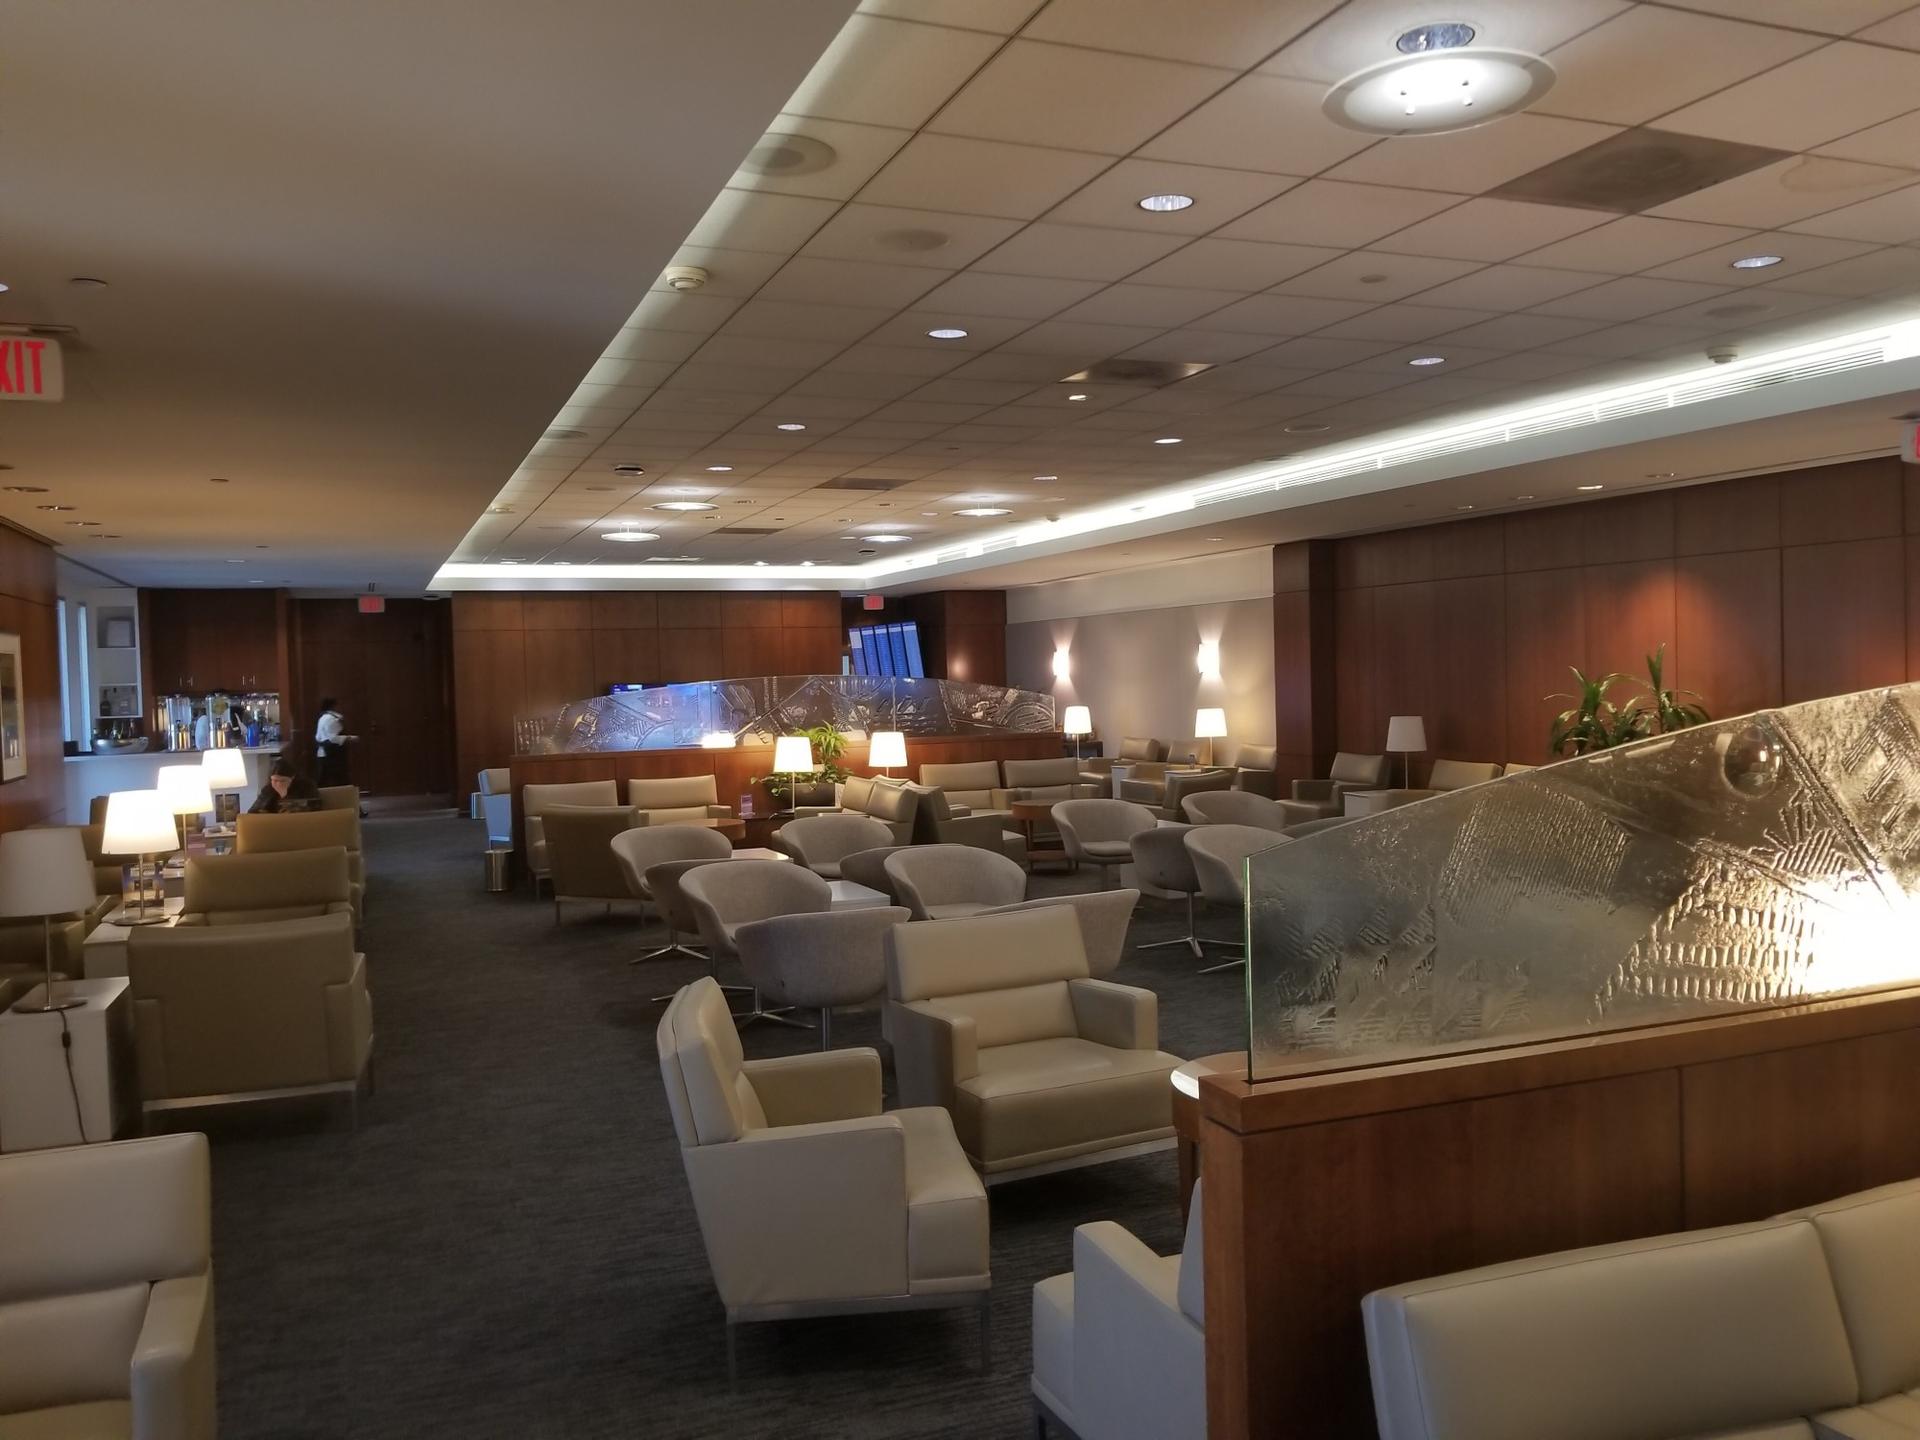 United Airlines United Club (Gate C4) image 3 of 3